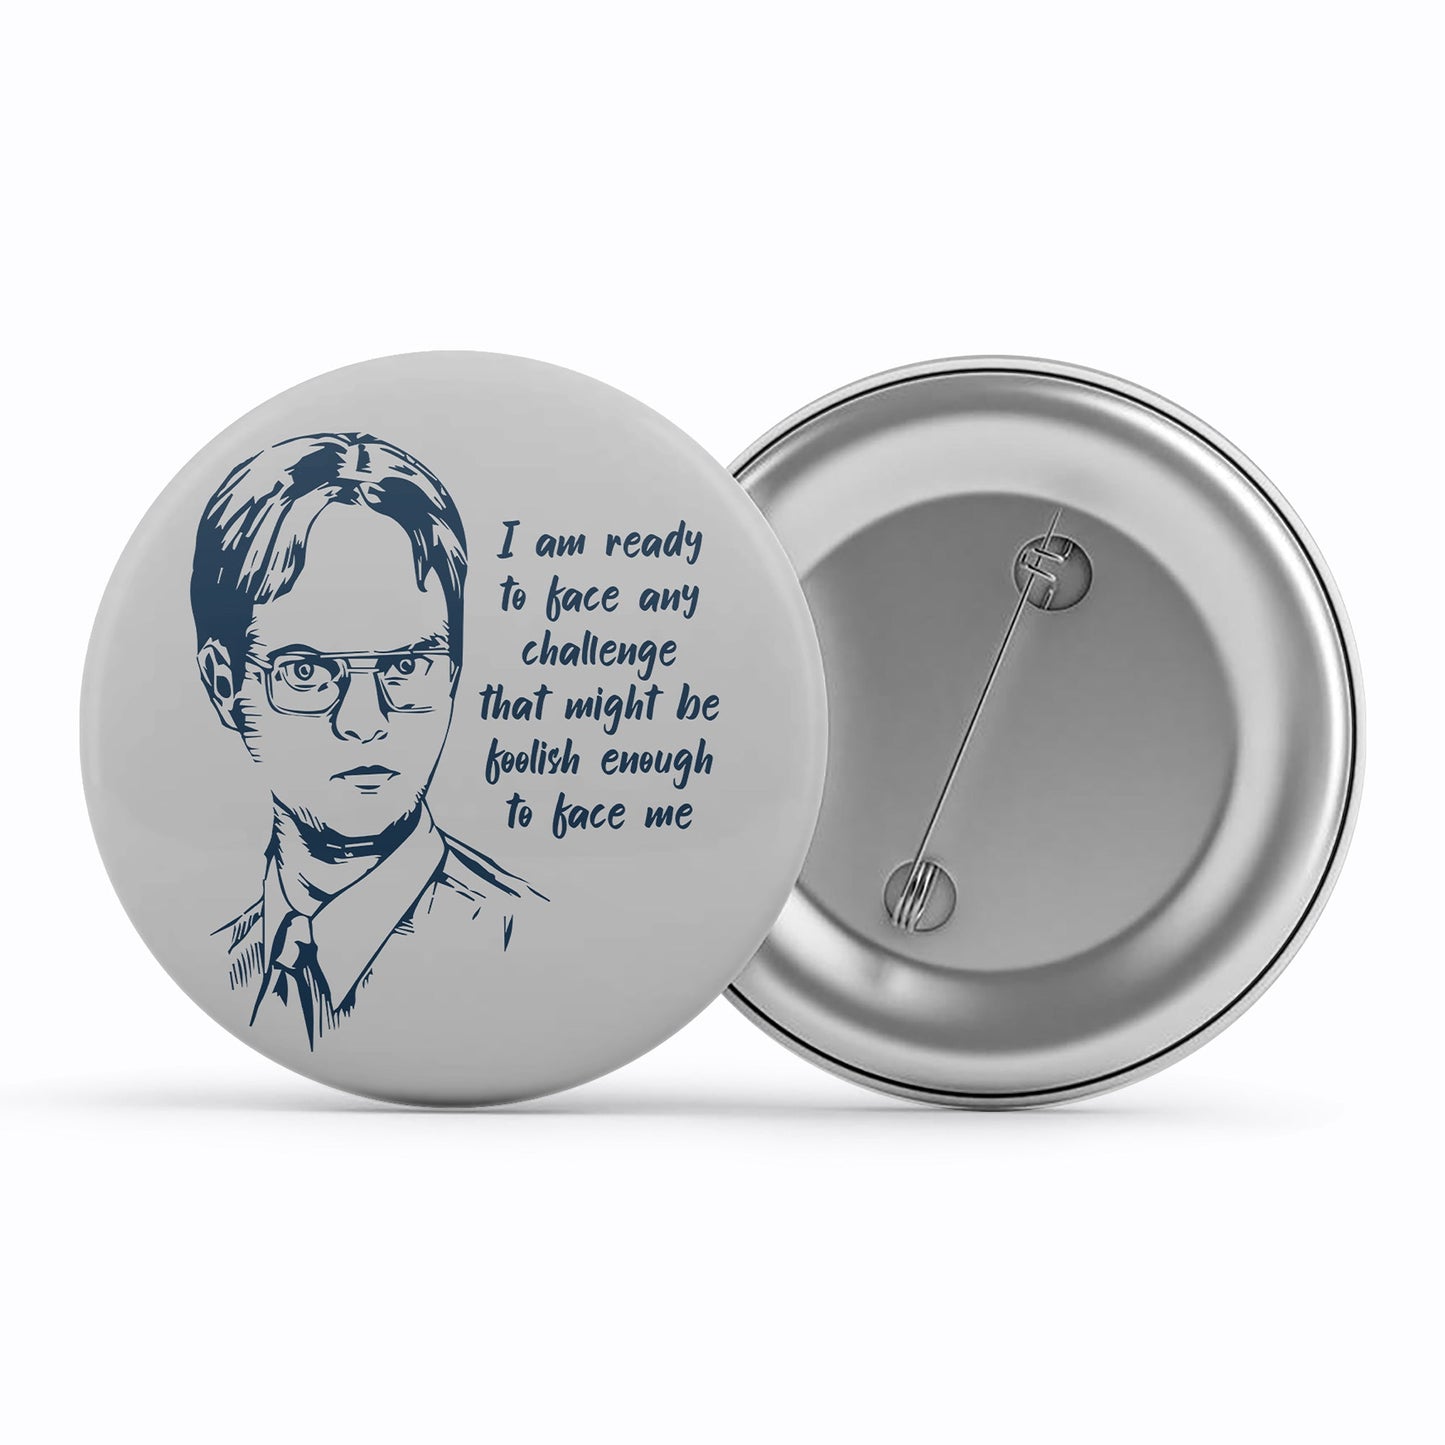 the office dwight badge pin button tv & movies buy online india the banyan tee tbt men women girls boys unisex  - i am ready to face any challenge